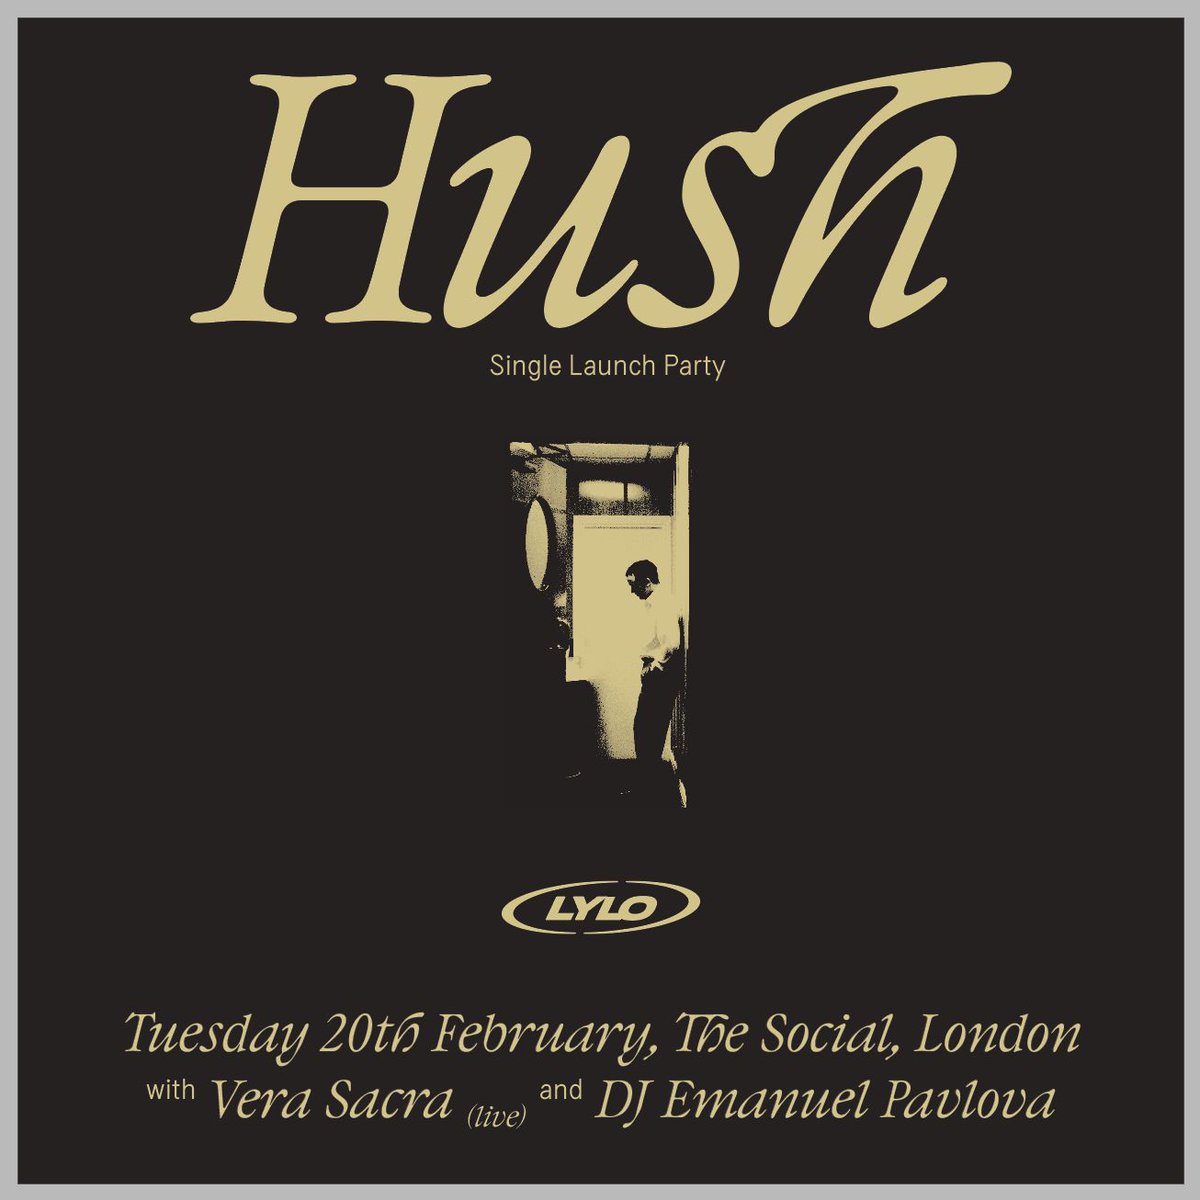 @lyloband release ‘Hush’ on 21/02/24. The track comes from their hotly anticipated new album ‘Thoughts Of Never’, the follow up to 2018’s critically acclaimed ‘Post Era’. LYLO will be performing live at @thesociallondon on Tuesday 20th Feb w/ @vera.sacra and DJ @emanuelpavlova